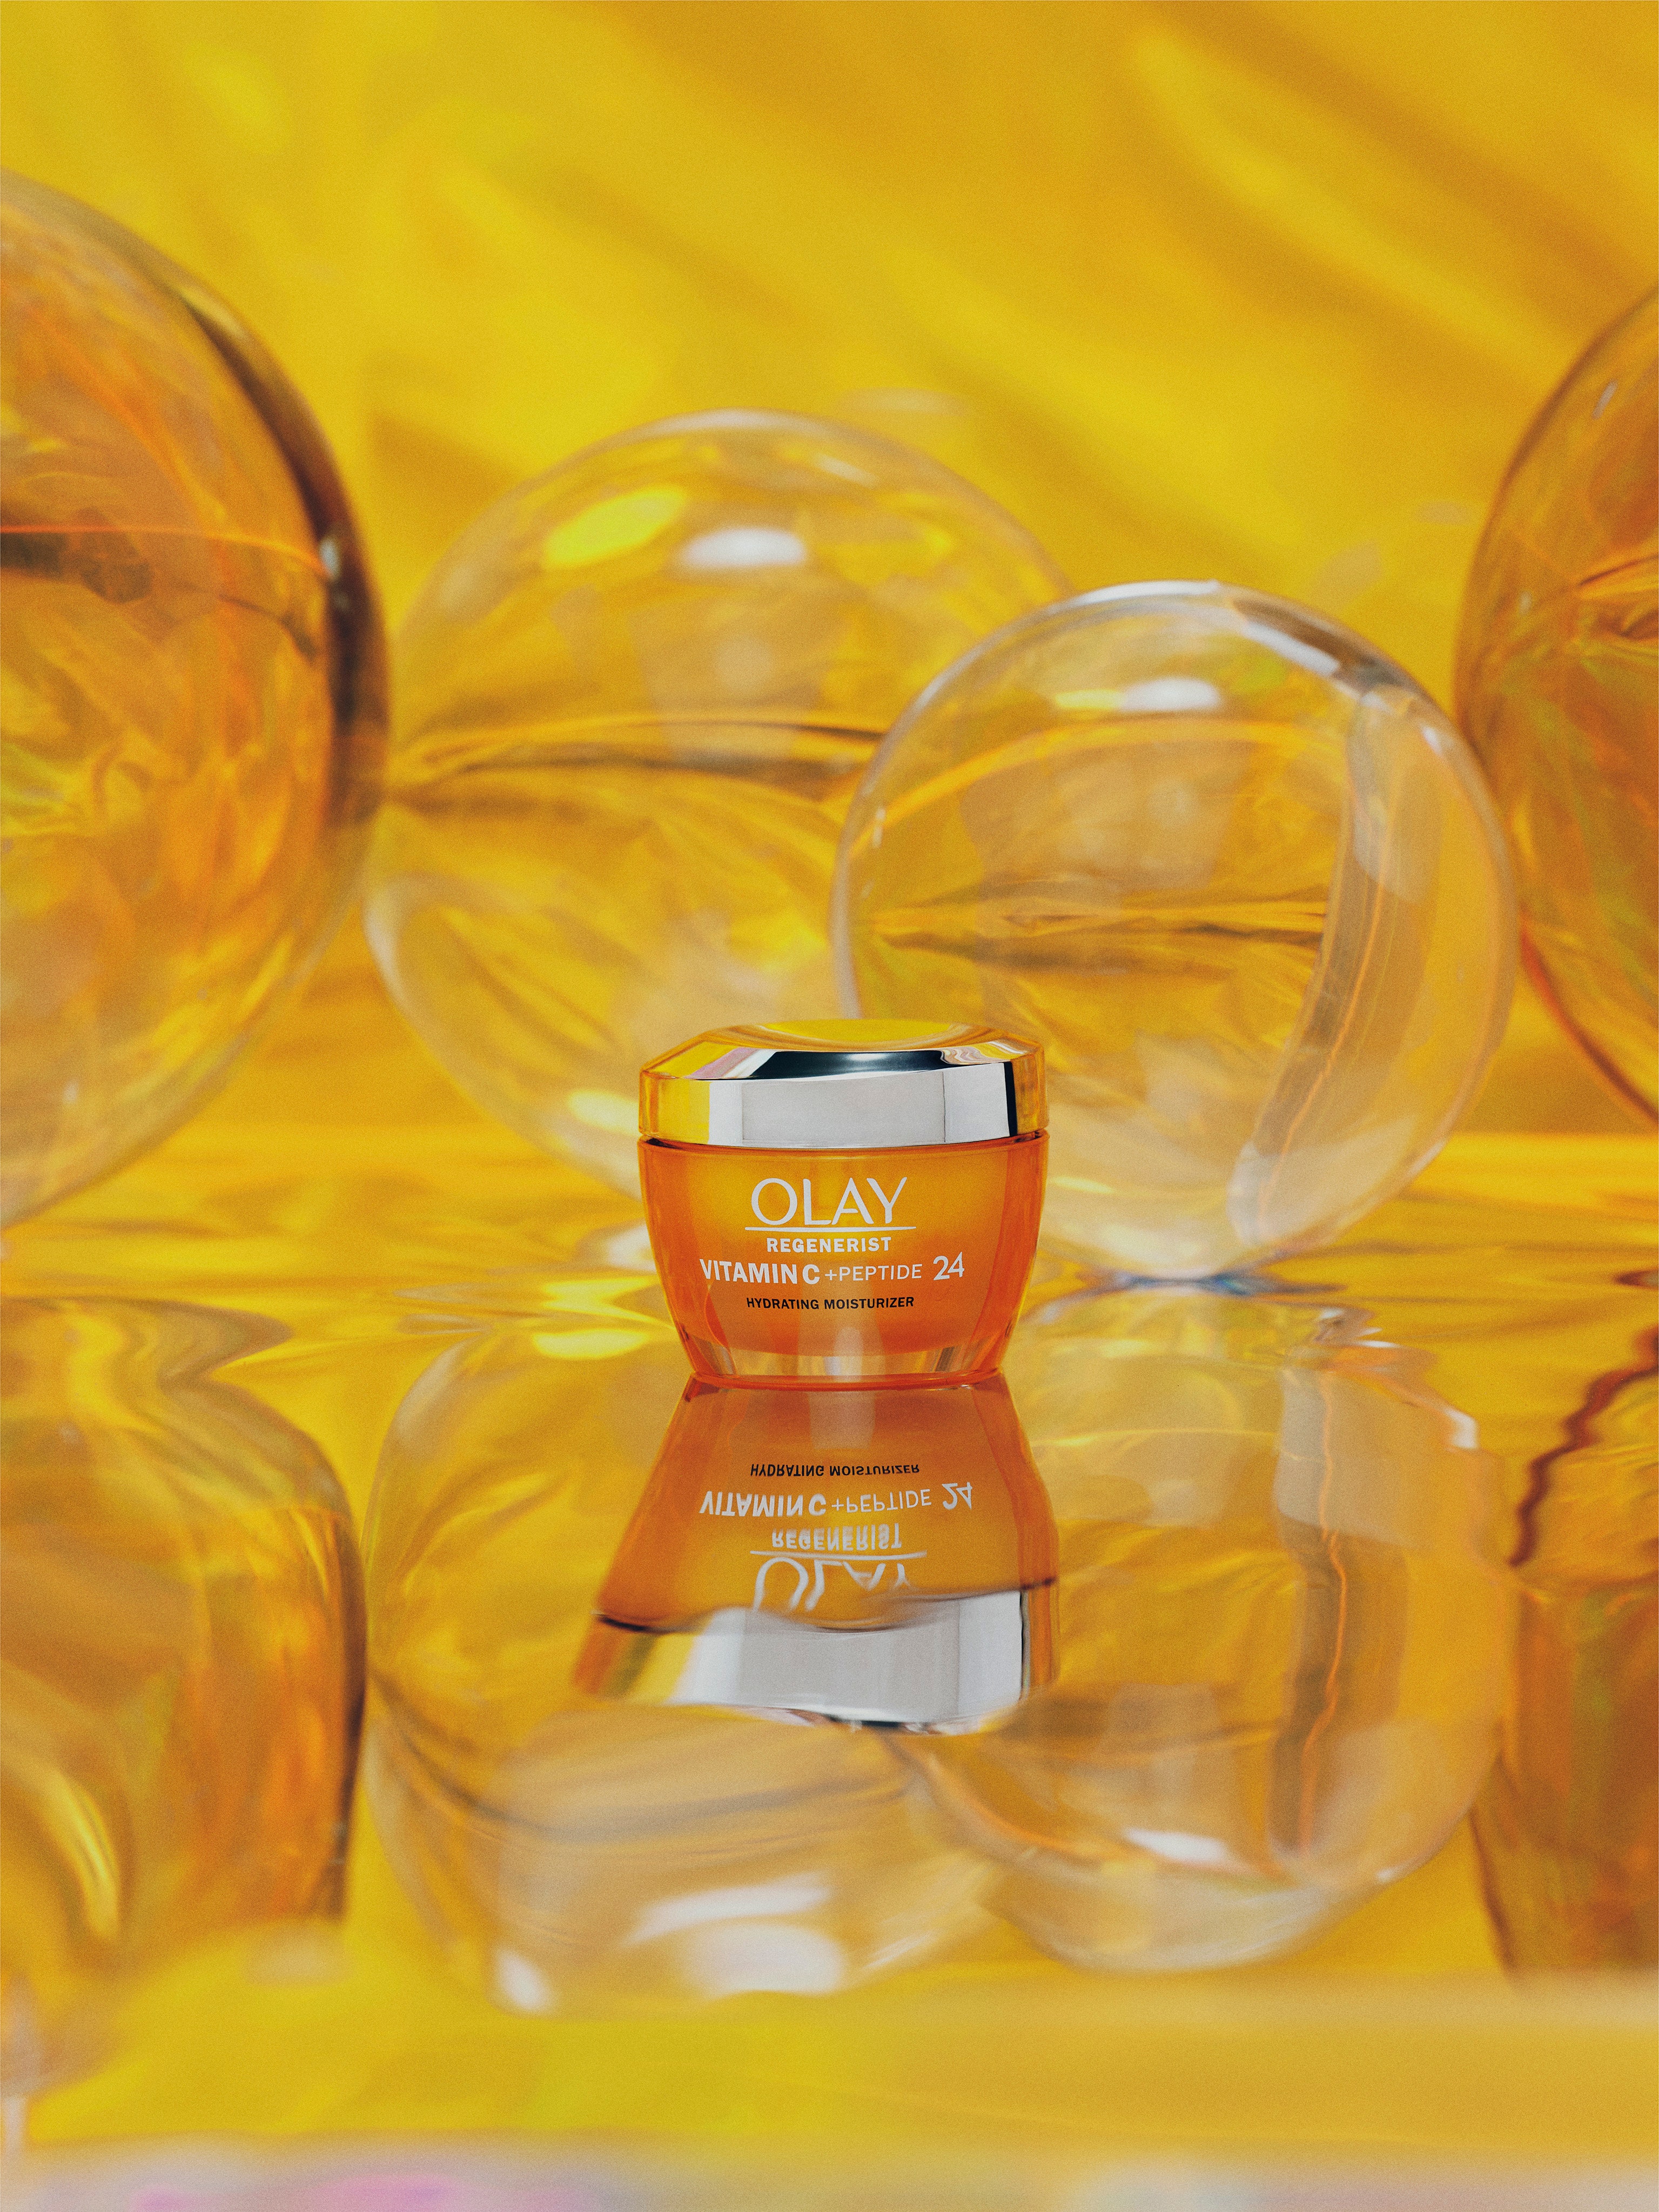 A Glowing Vitamin C Product Made by Women of Color for Women of Color.